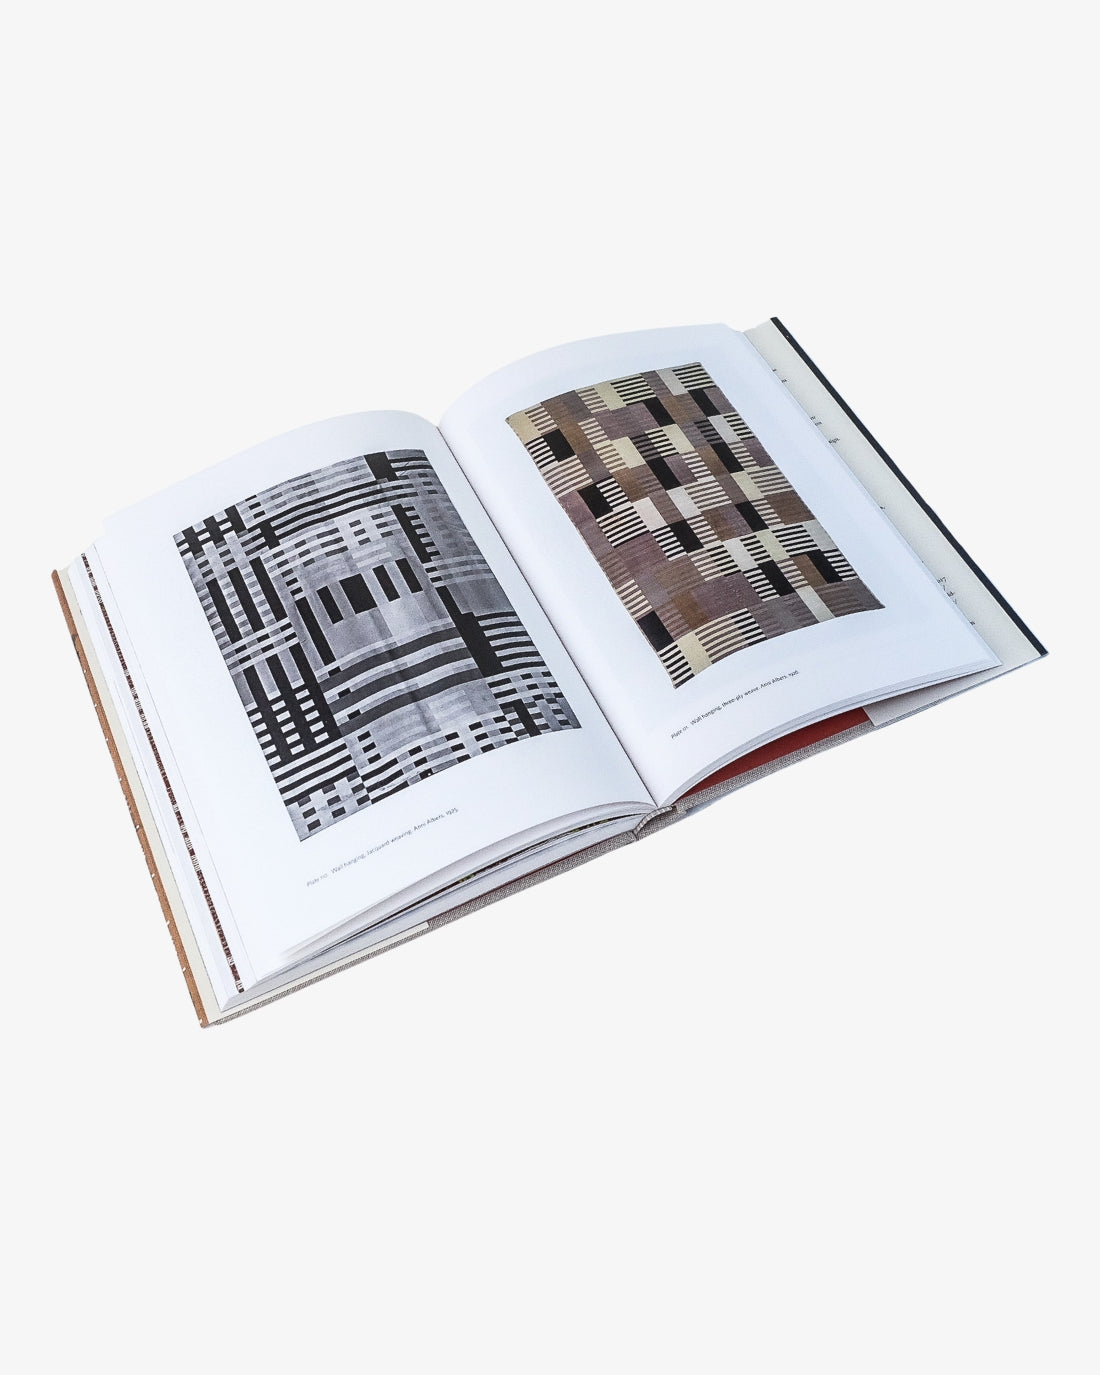 On Weaving by Anni Albers